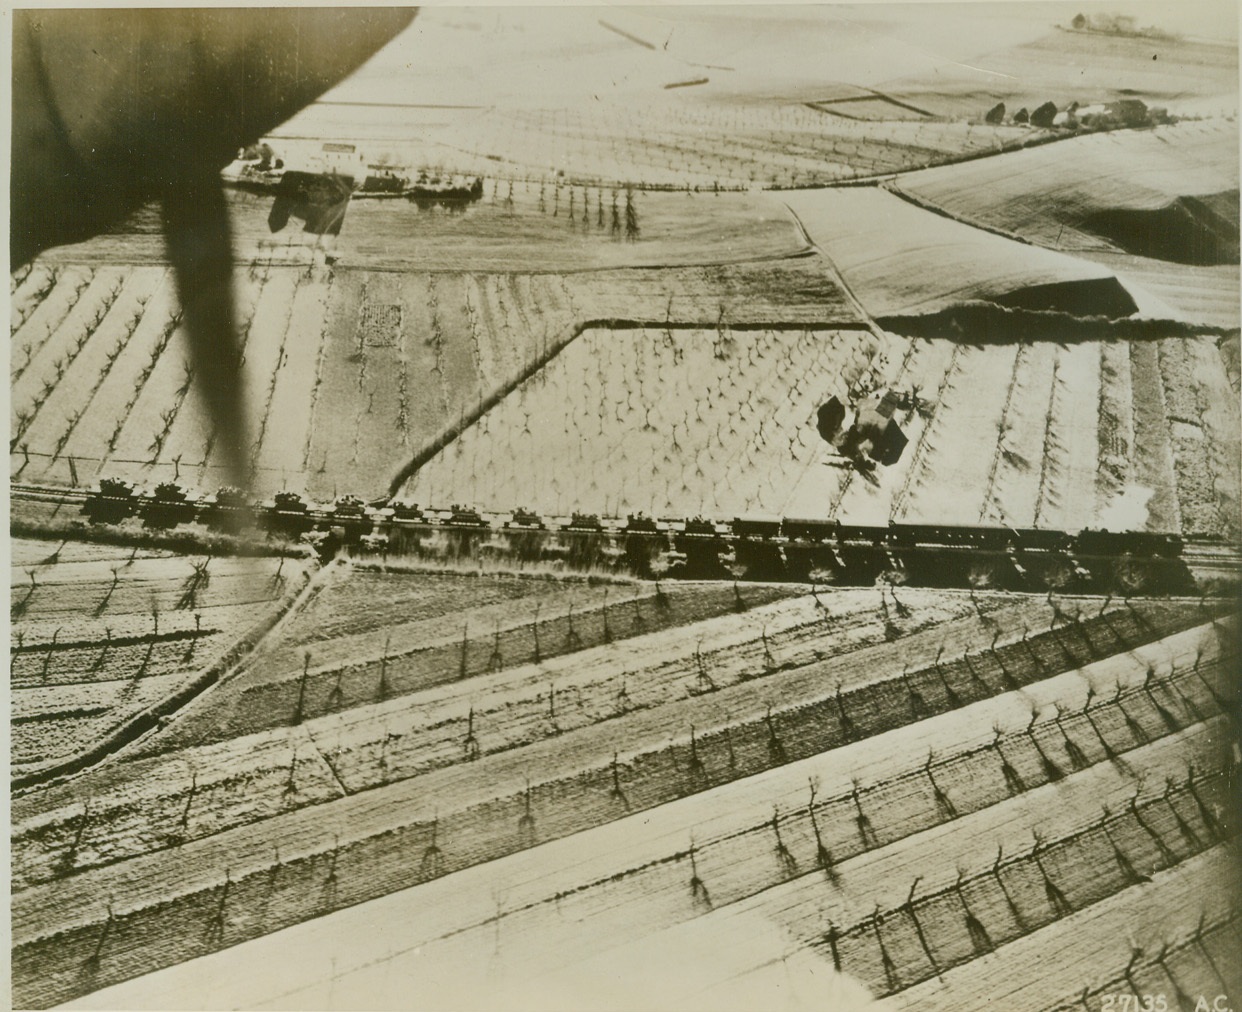 Nazi Tanks Travel, 2/4/1944. A trainload of Nazi tanks moves east of the town of Macerata, near the Adriatic coast of Italy, in this photo, made by a reconnaissance pilot of the U.S.A.A.F. The tanks are Mark IIIs, mounted with assault guns. They were being hauled to reinforce the German units facing the British Eighth Army.  Credit (U.S. Army Air Force photo from AMCE);